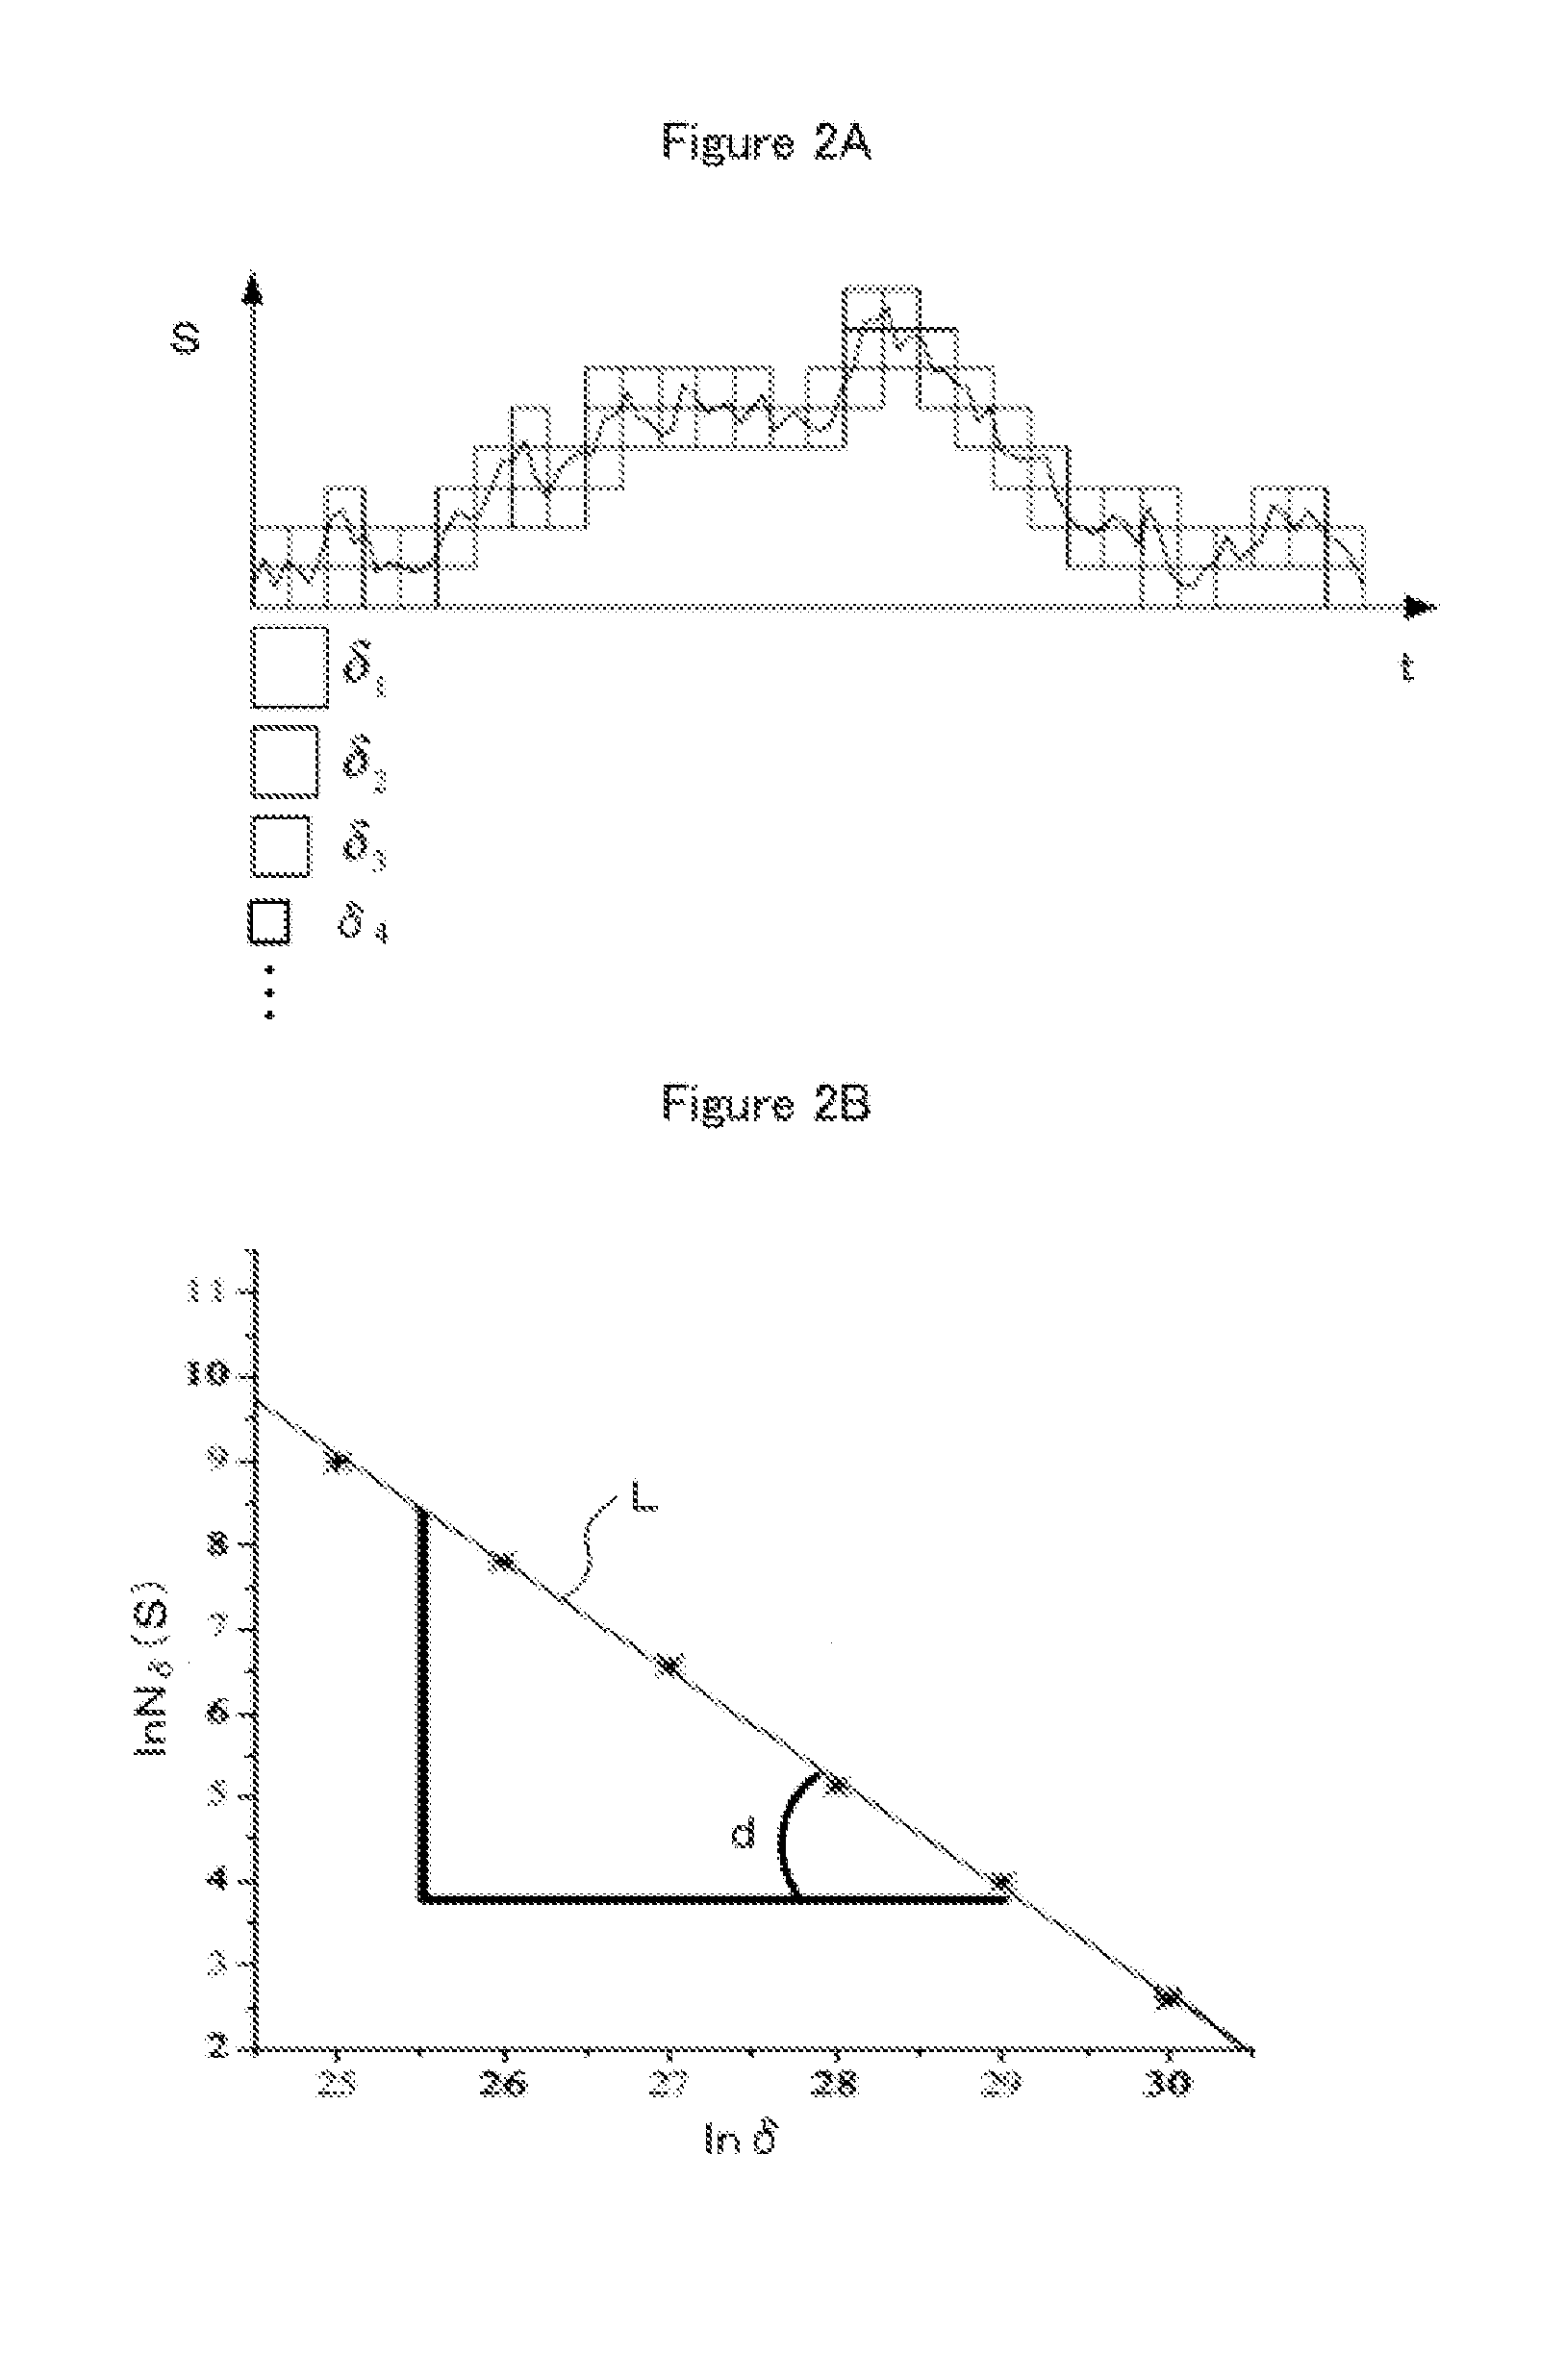 Welding quality classification apparatus